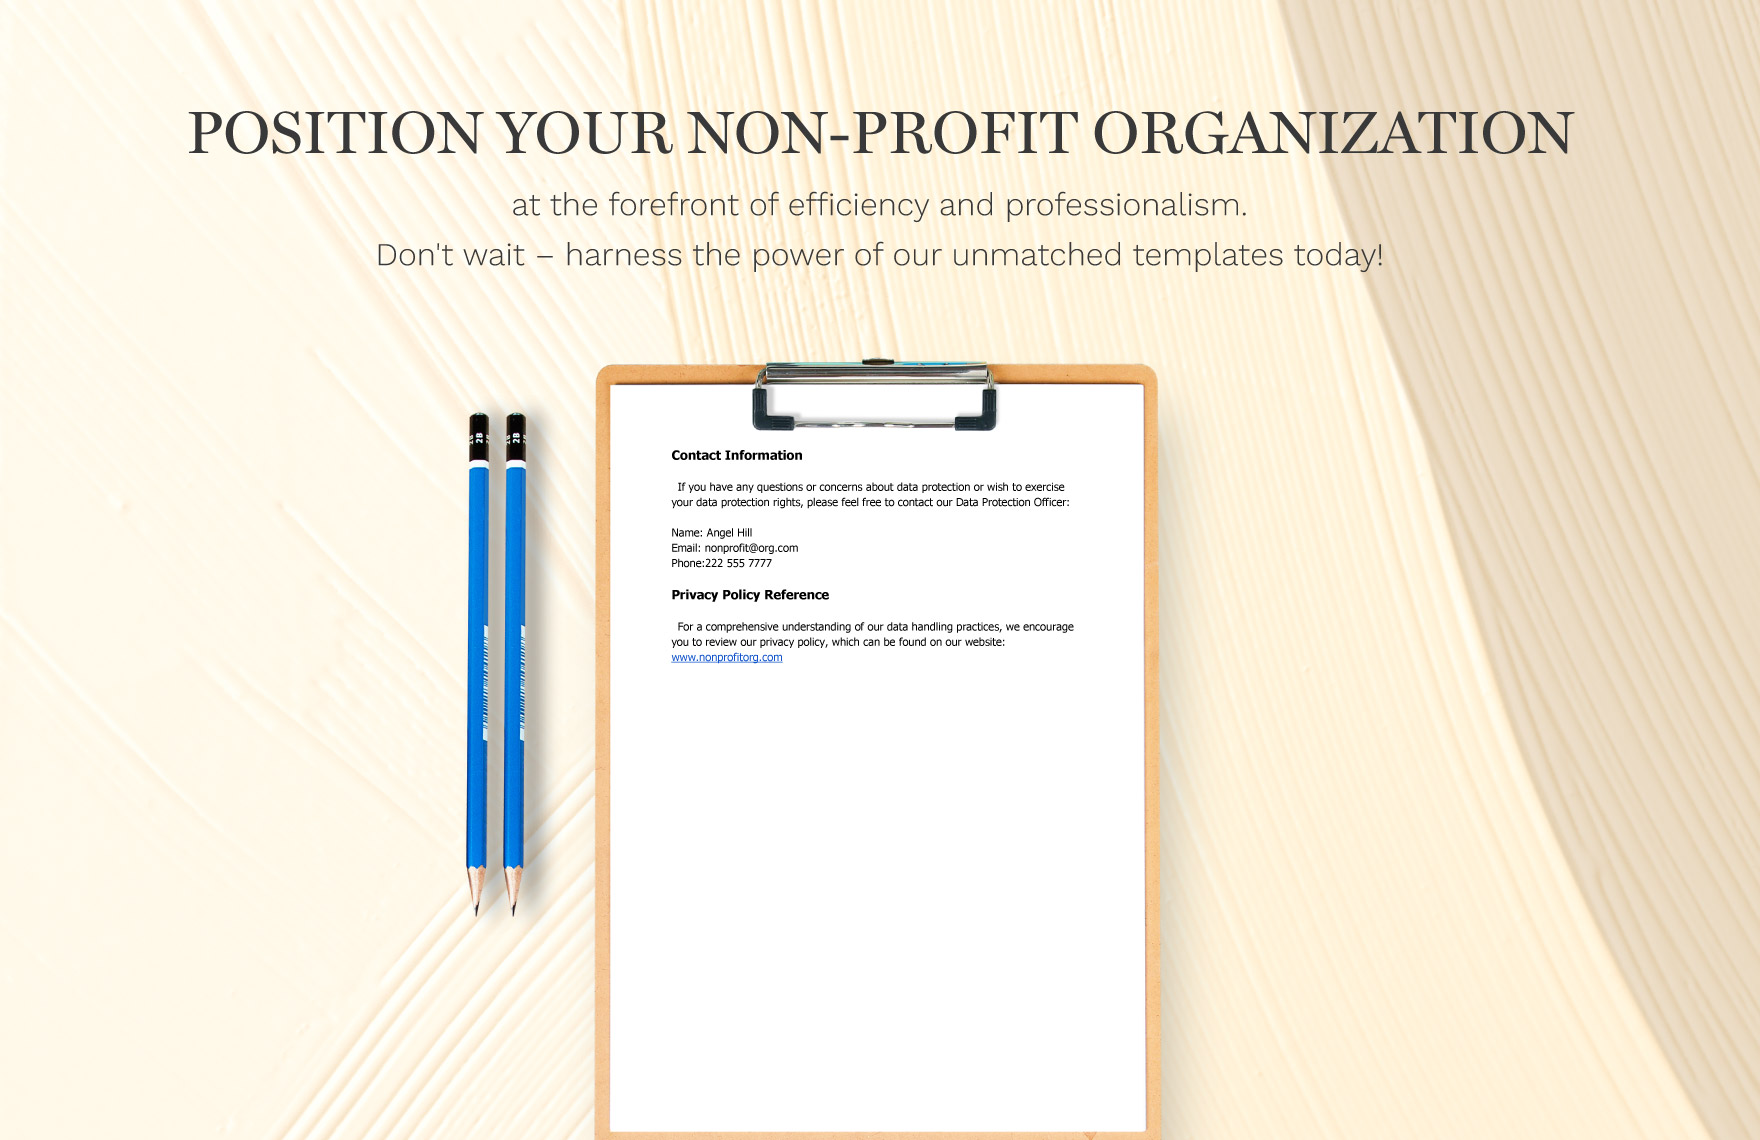 Nonprofit Organization Data Protection Consent Form Template